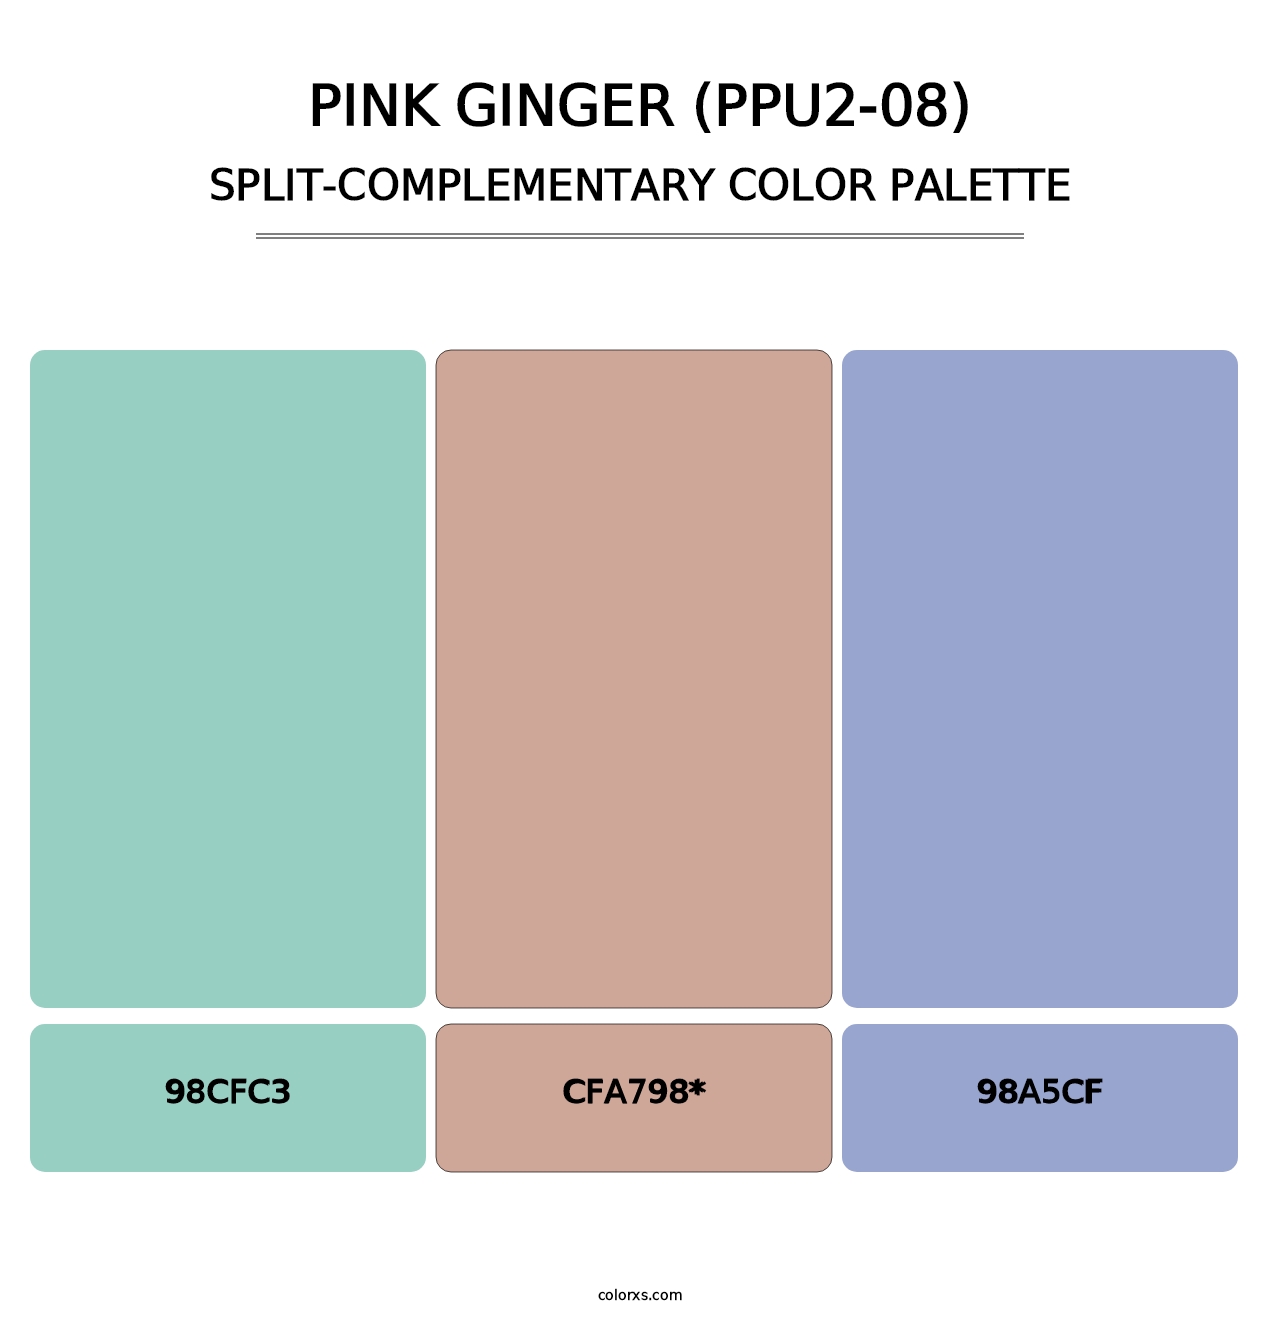 Pink Ginger (PPU2-08) - Split-Complementary Color Palette